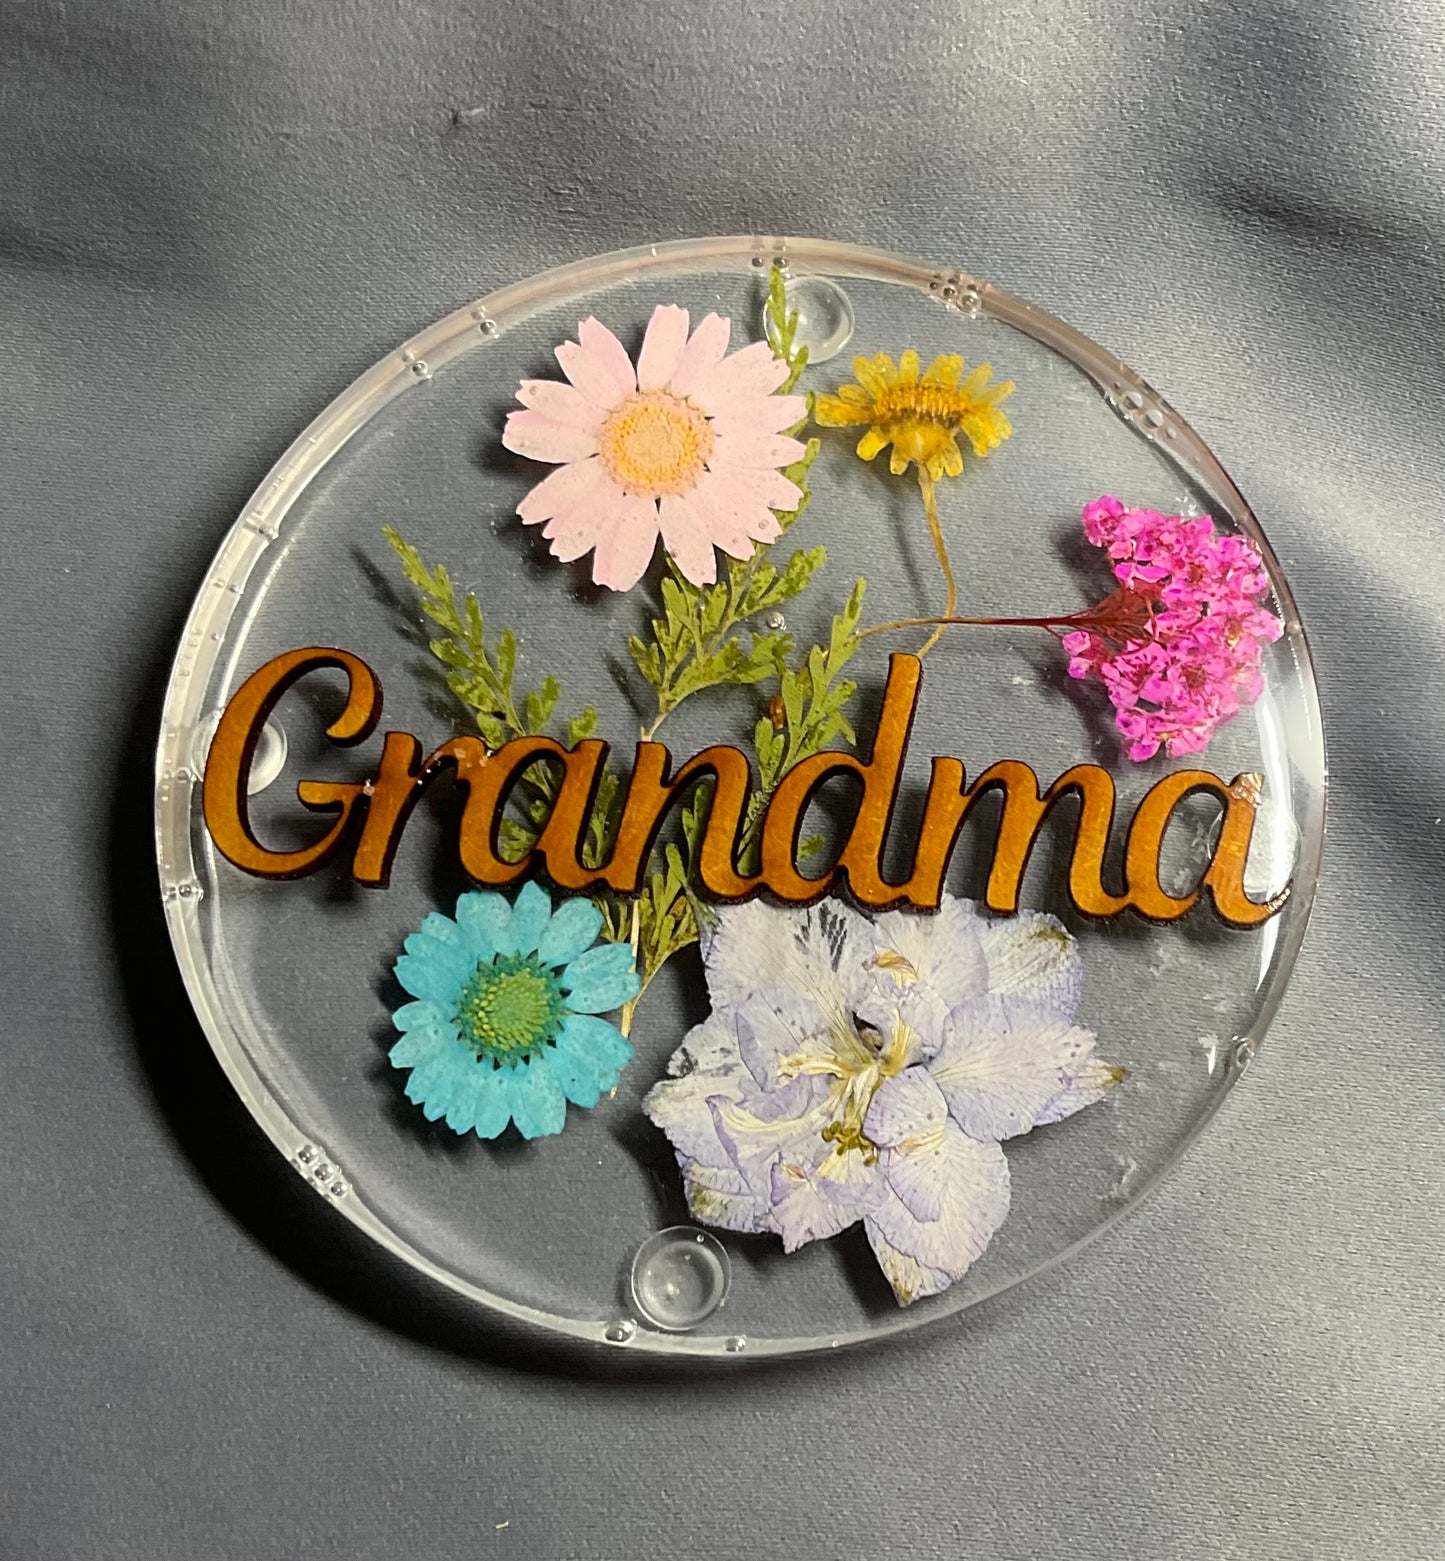 womens floral coaster, flower coaster, personalised coaster featuring a sepection of flowers, foliage and name of your choice, grandma coaster